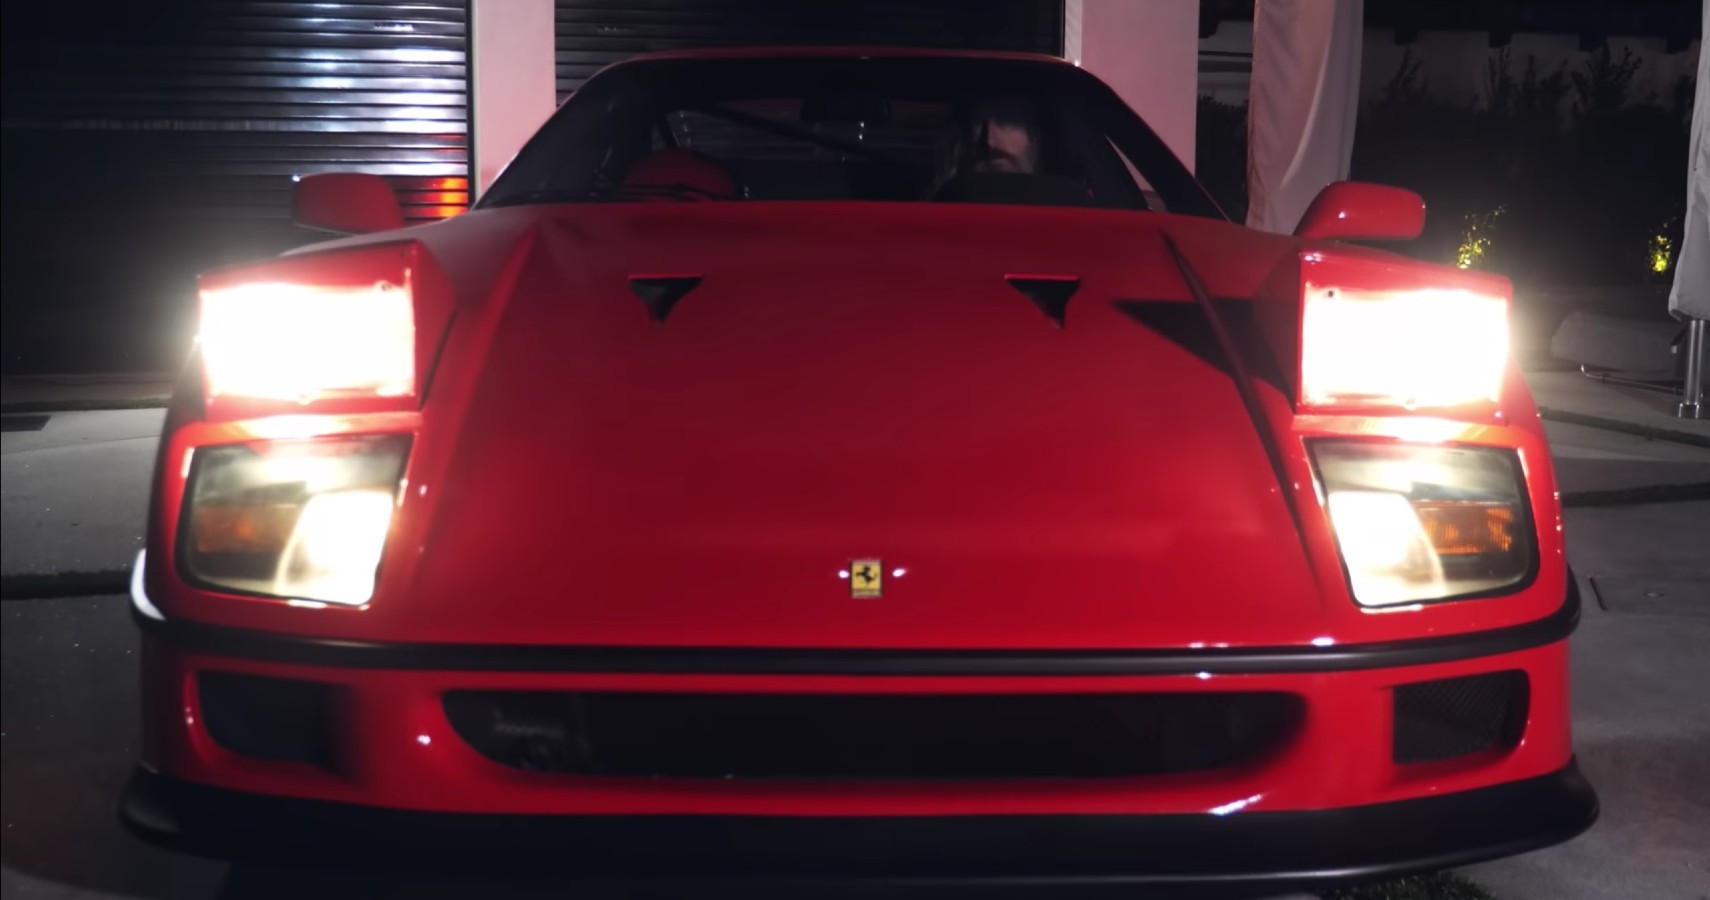 https://s1.cdn.autoevolution.com/images/news/gallery/this-is-why-the-iconic-ferrari-f40-is-the-wildest-prancing-horse-out-of-maranello-italy_2.jpg